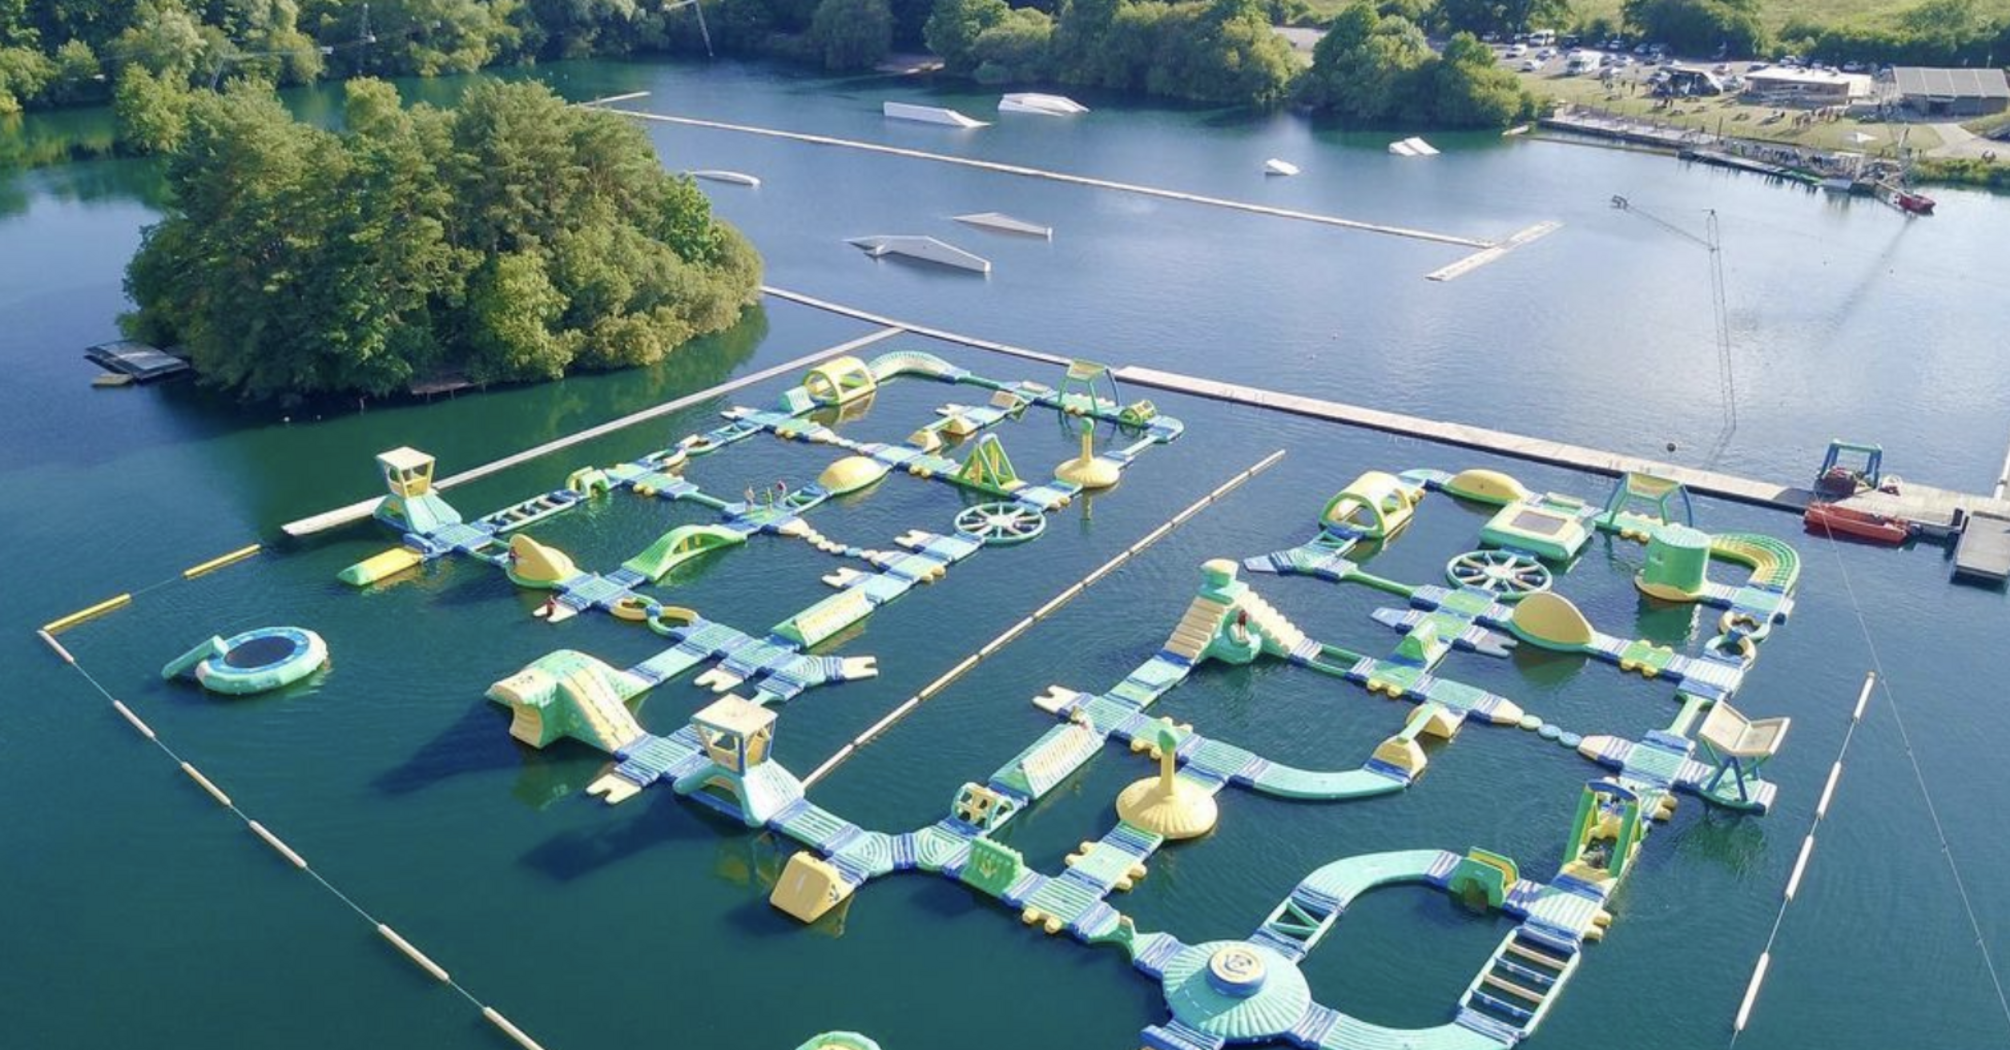 The largest floating water park in the UK: when does it open and what does it offer